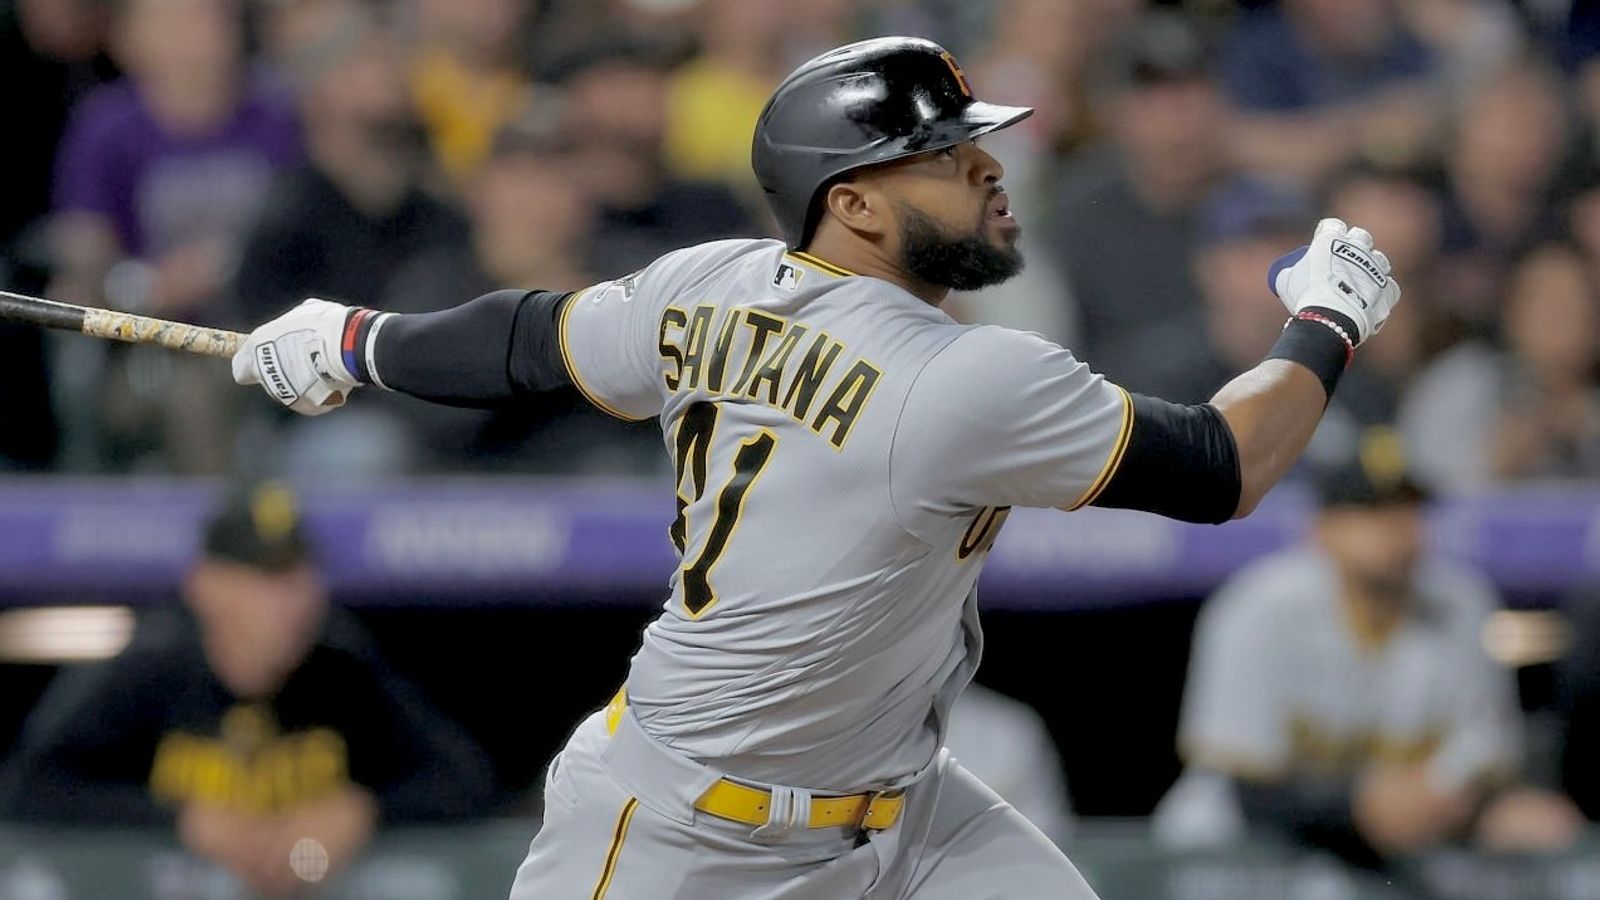 After huge night for bats, Pirates' message is 'we have to keep